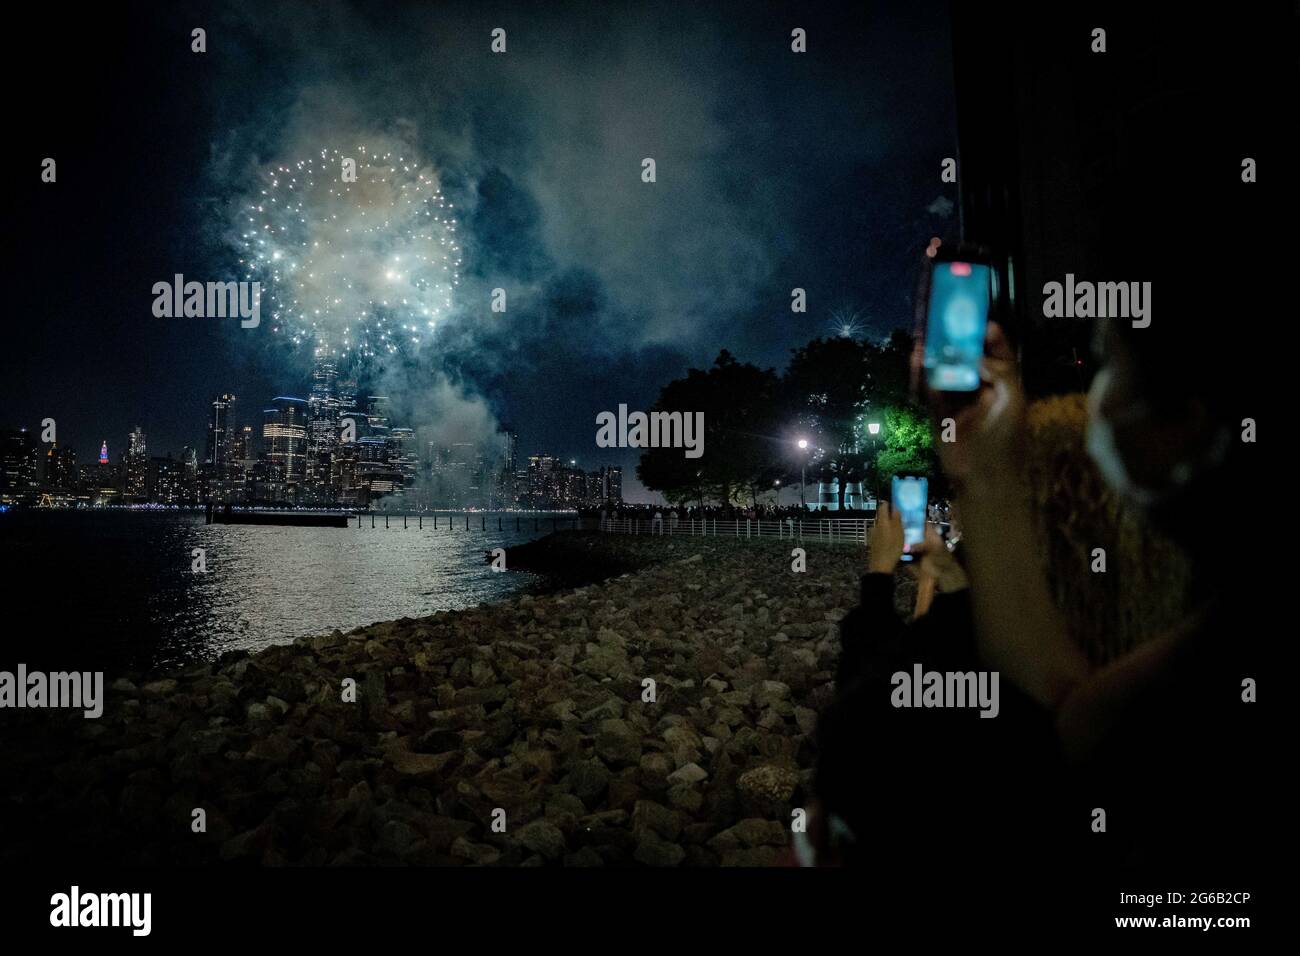 July 4, 2021: Families watch the Jersey City fireworks display from the Newport area of Jersey City, NJ, Sunday, July 4, 2021. Credit: Michael Candelori/ZUMA Wire/Alamy Live News Stock Photo